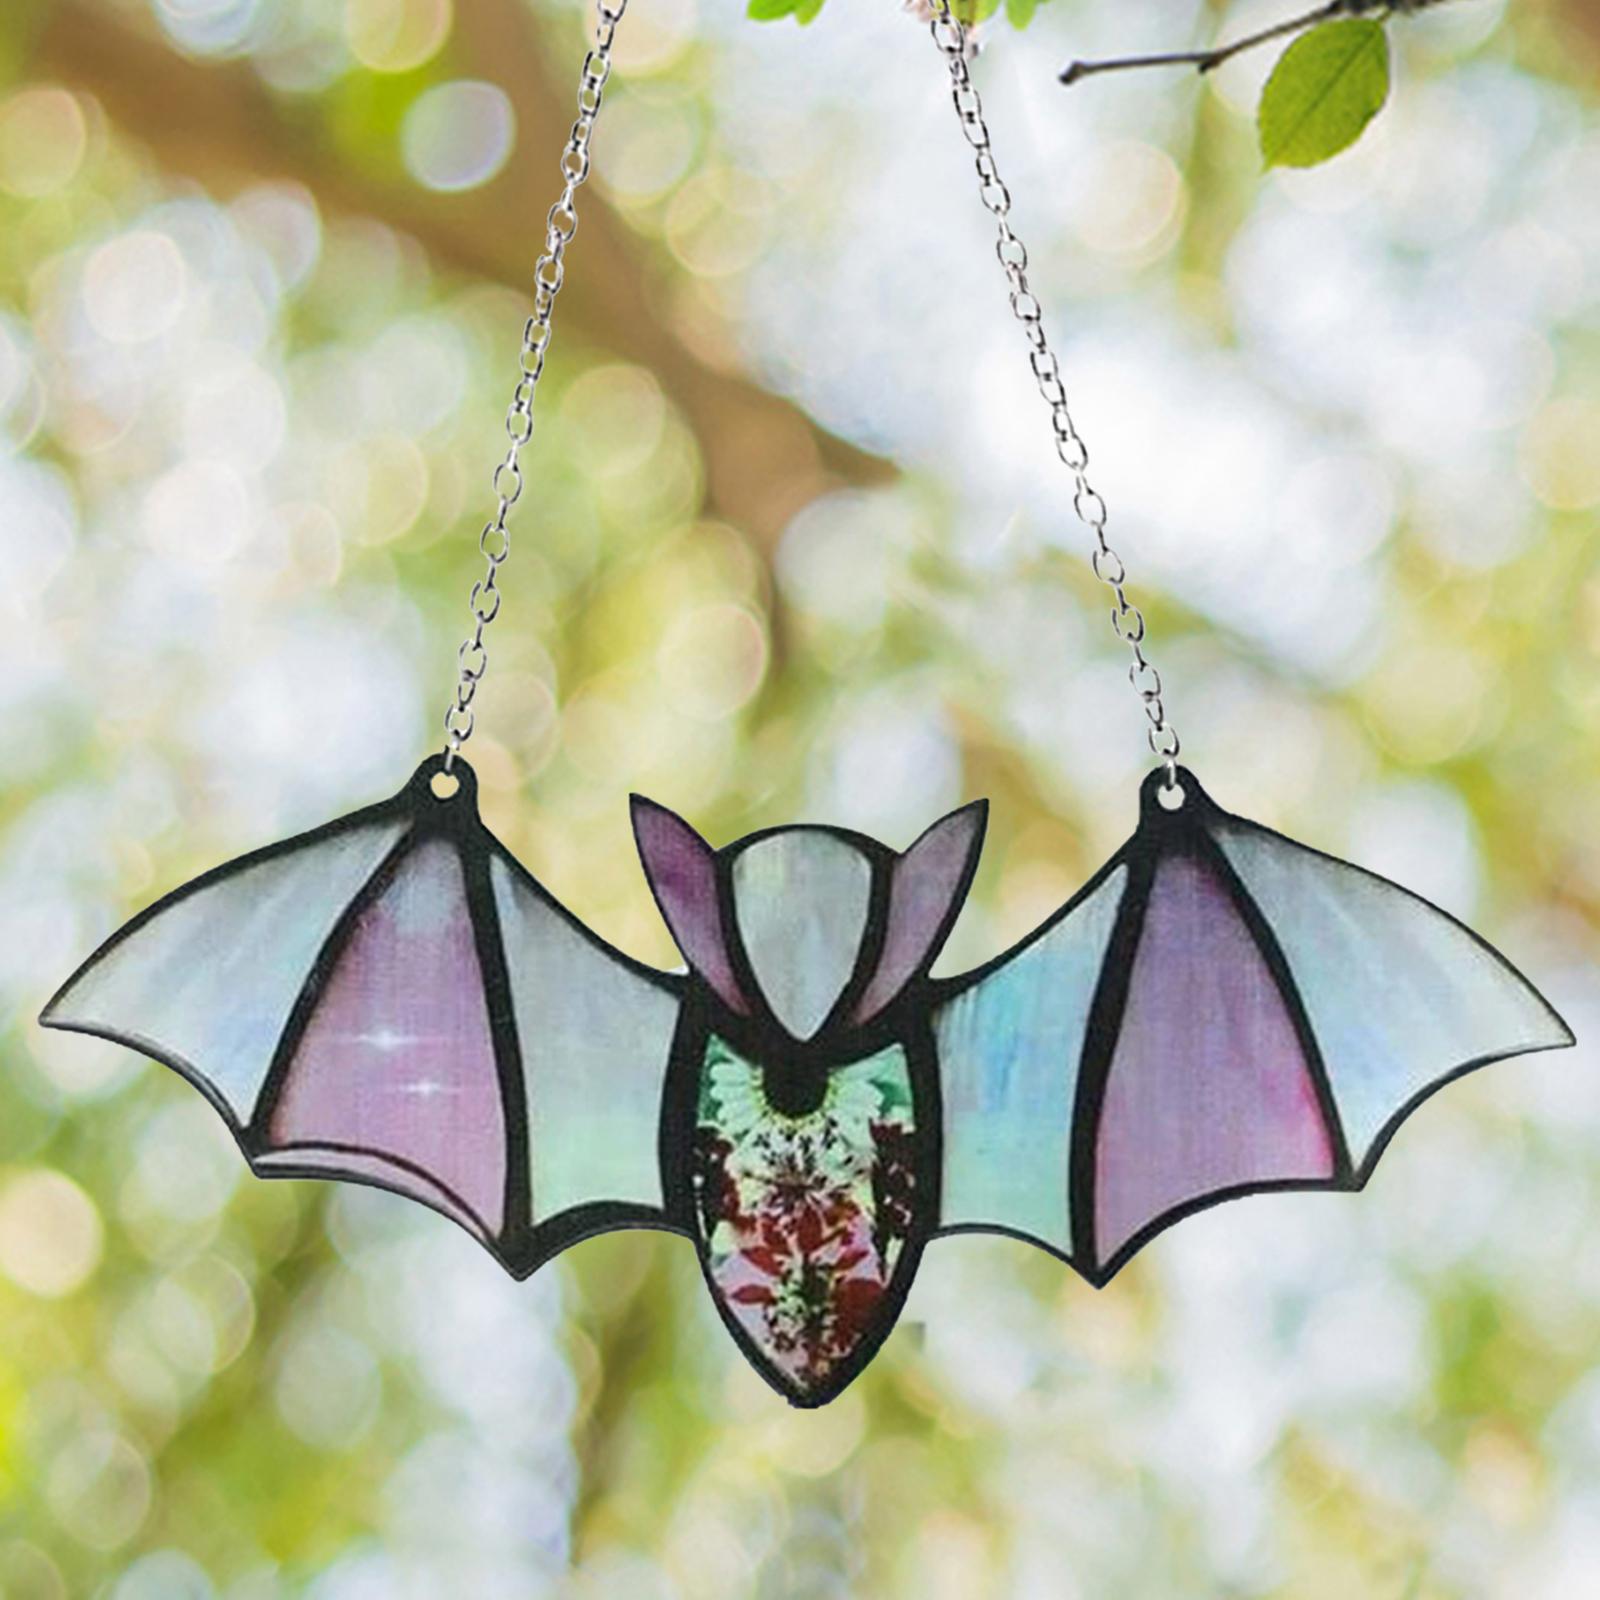 Hanging Bat Decoration Bat Stained Glass Window Hanging for Yard Bar Bedroom Style C